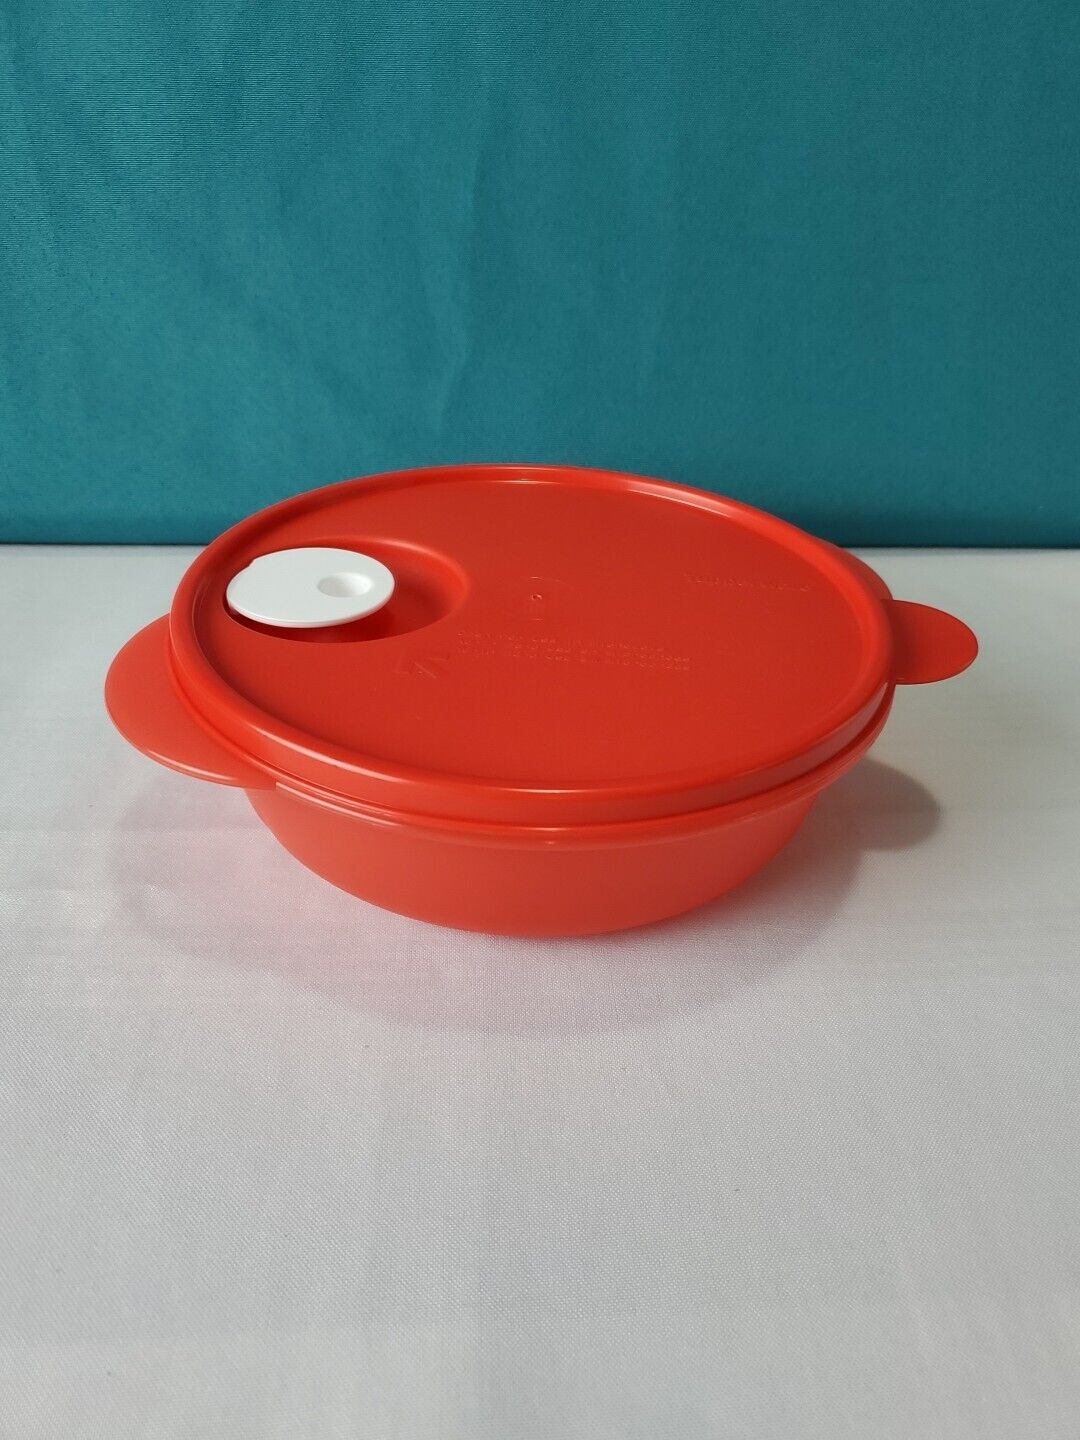 Tupperware Crystalwave Microwave Divided Dish 825ml/ 3.25 cup New Sale Red Sale.